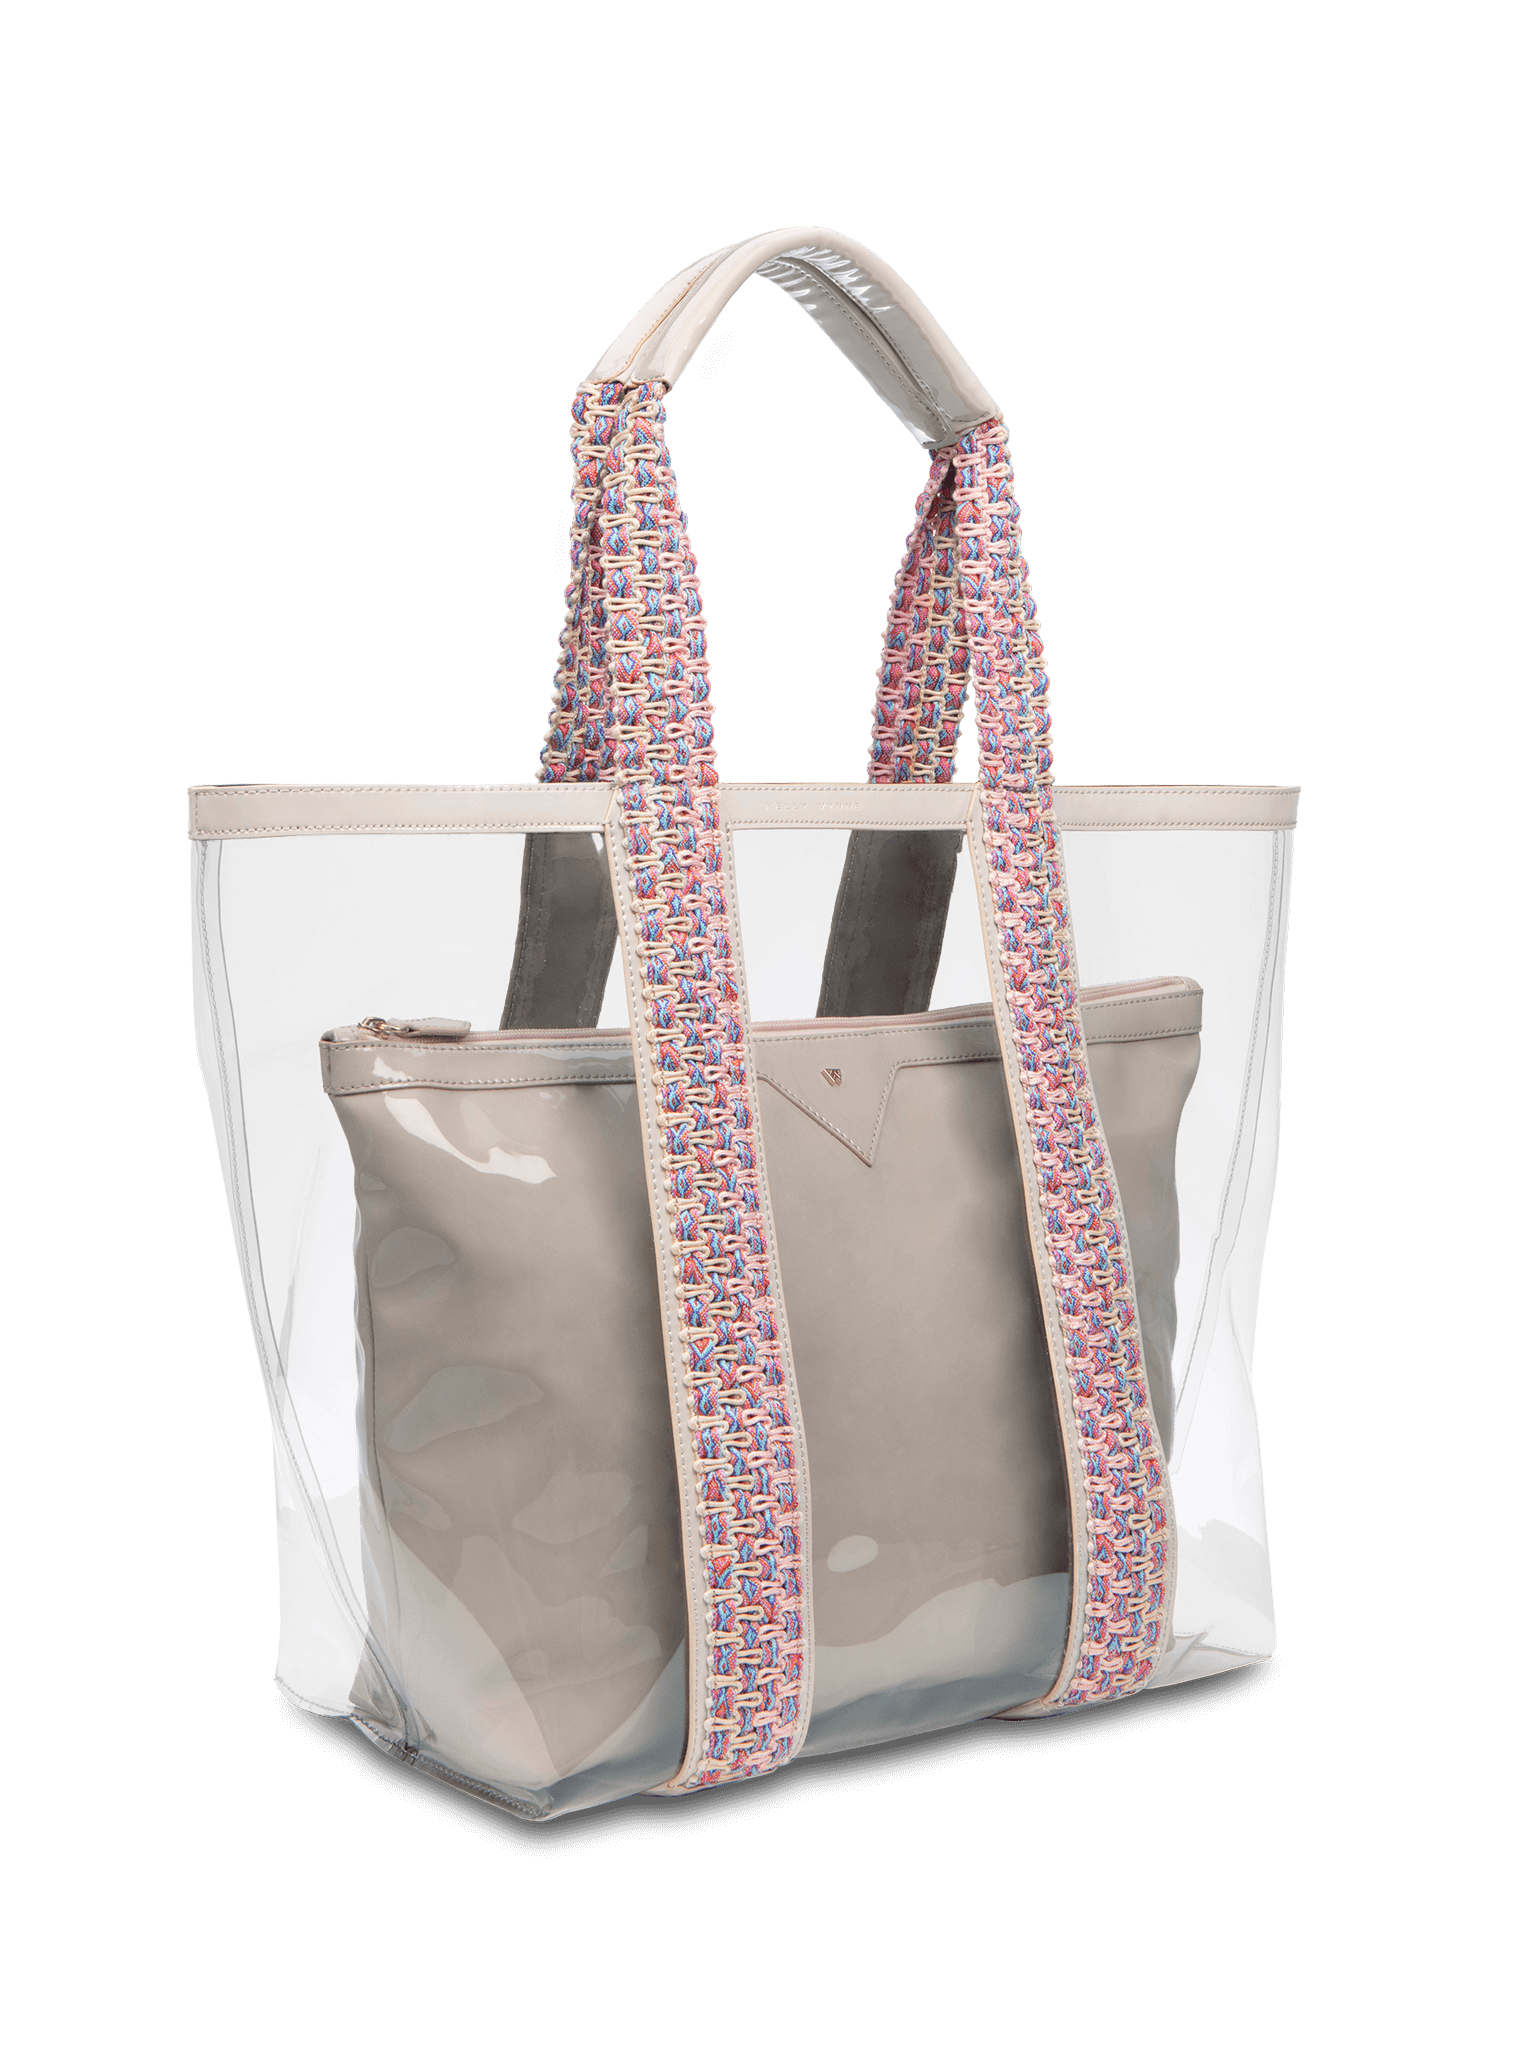 Clear exterior tote large enough to pack all your summer essentials. Waterproof material to make cleaning a breeze. Removable interior pouch made with water resistant vegan leather in taupe. 